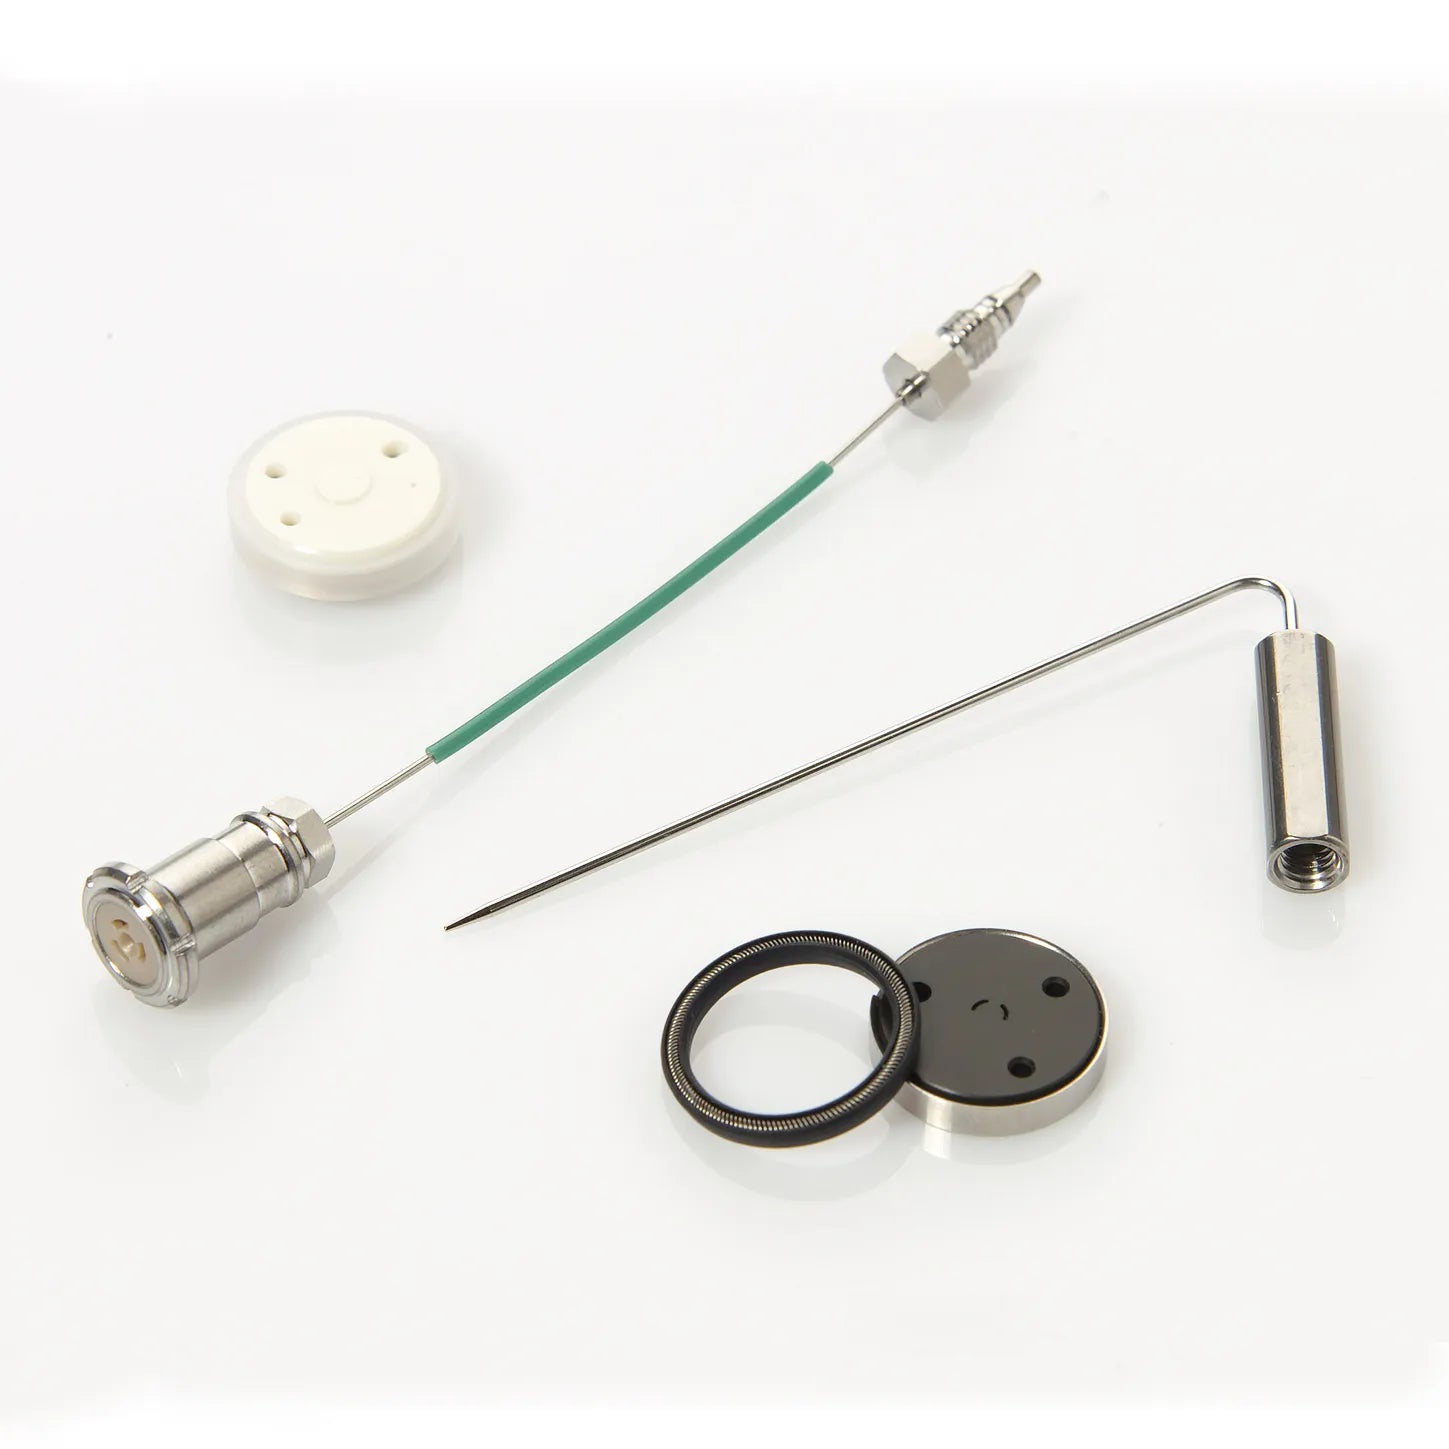 Extended PM Kit for Standard Autosamplers, Comparable to Agilent # 5065-4498